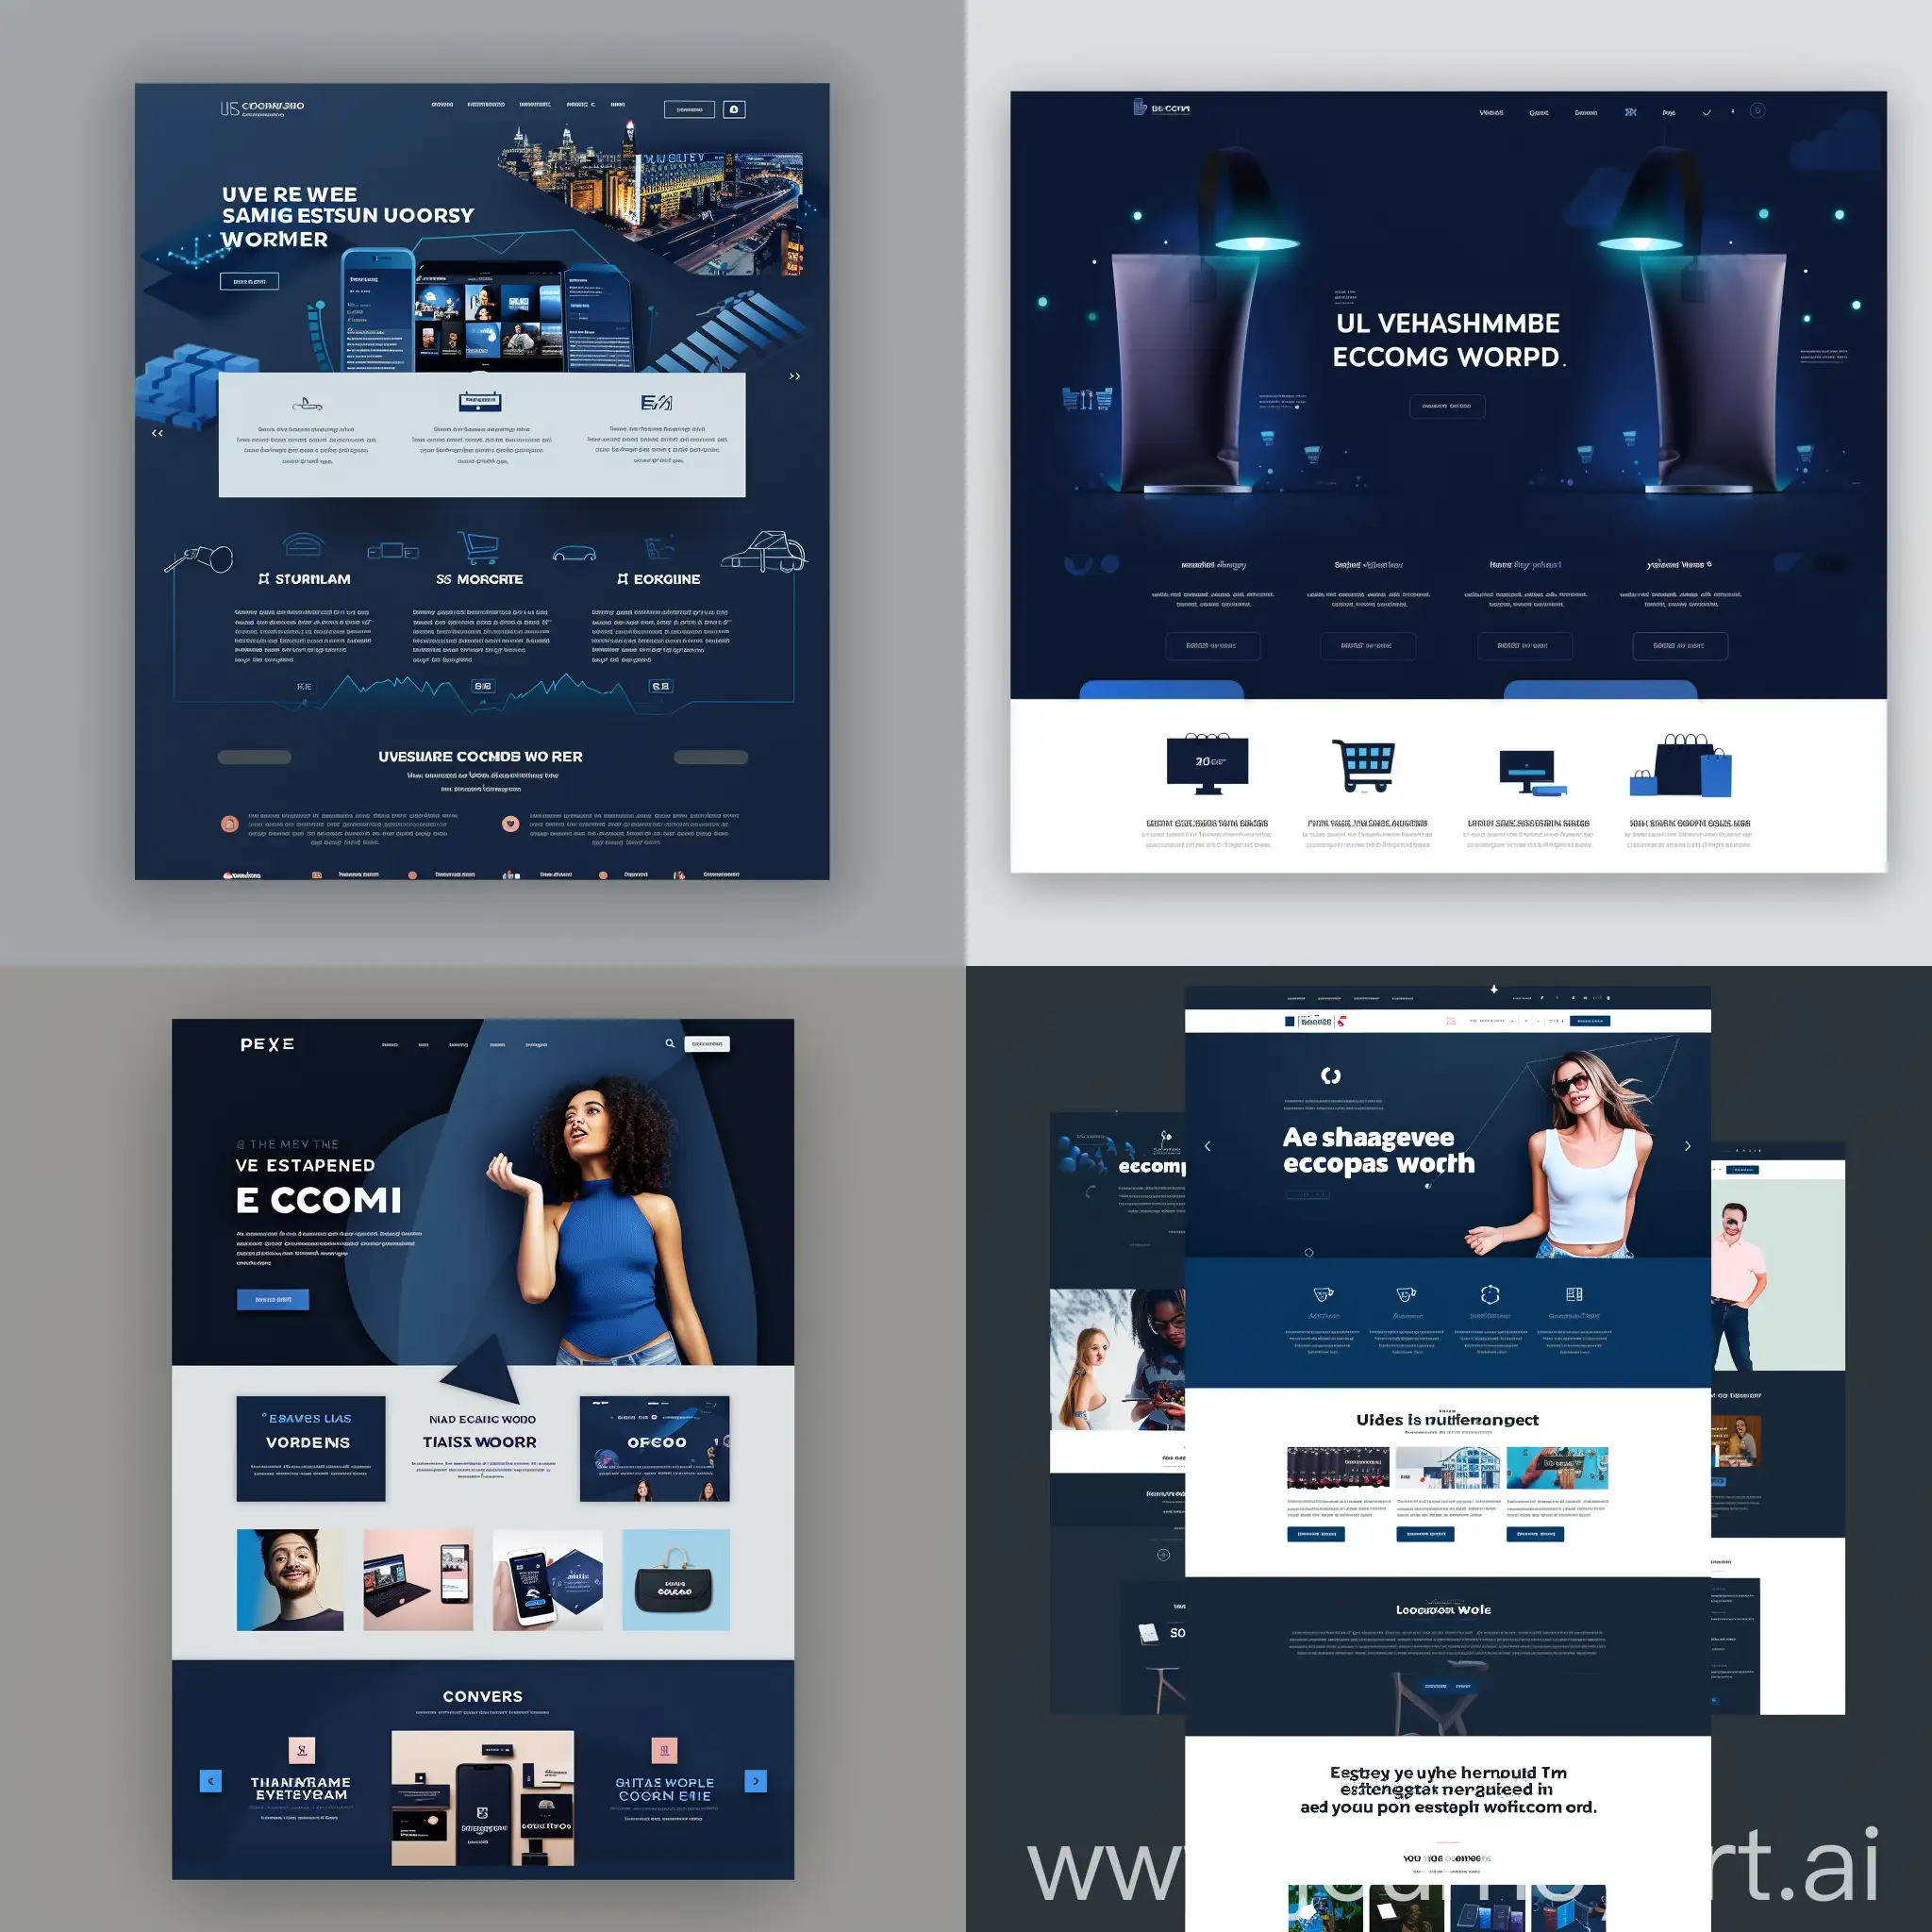 Make me professional stylish e-commerce company landing page with main color blue/dark blue. We are shaping the ecom world!